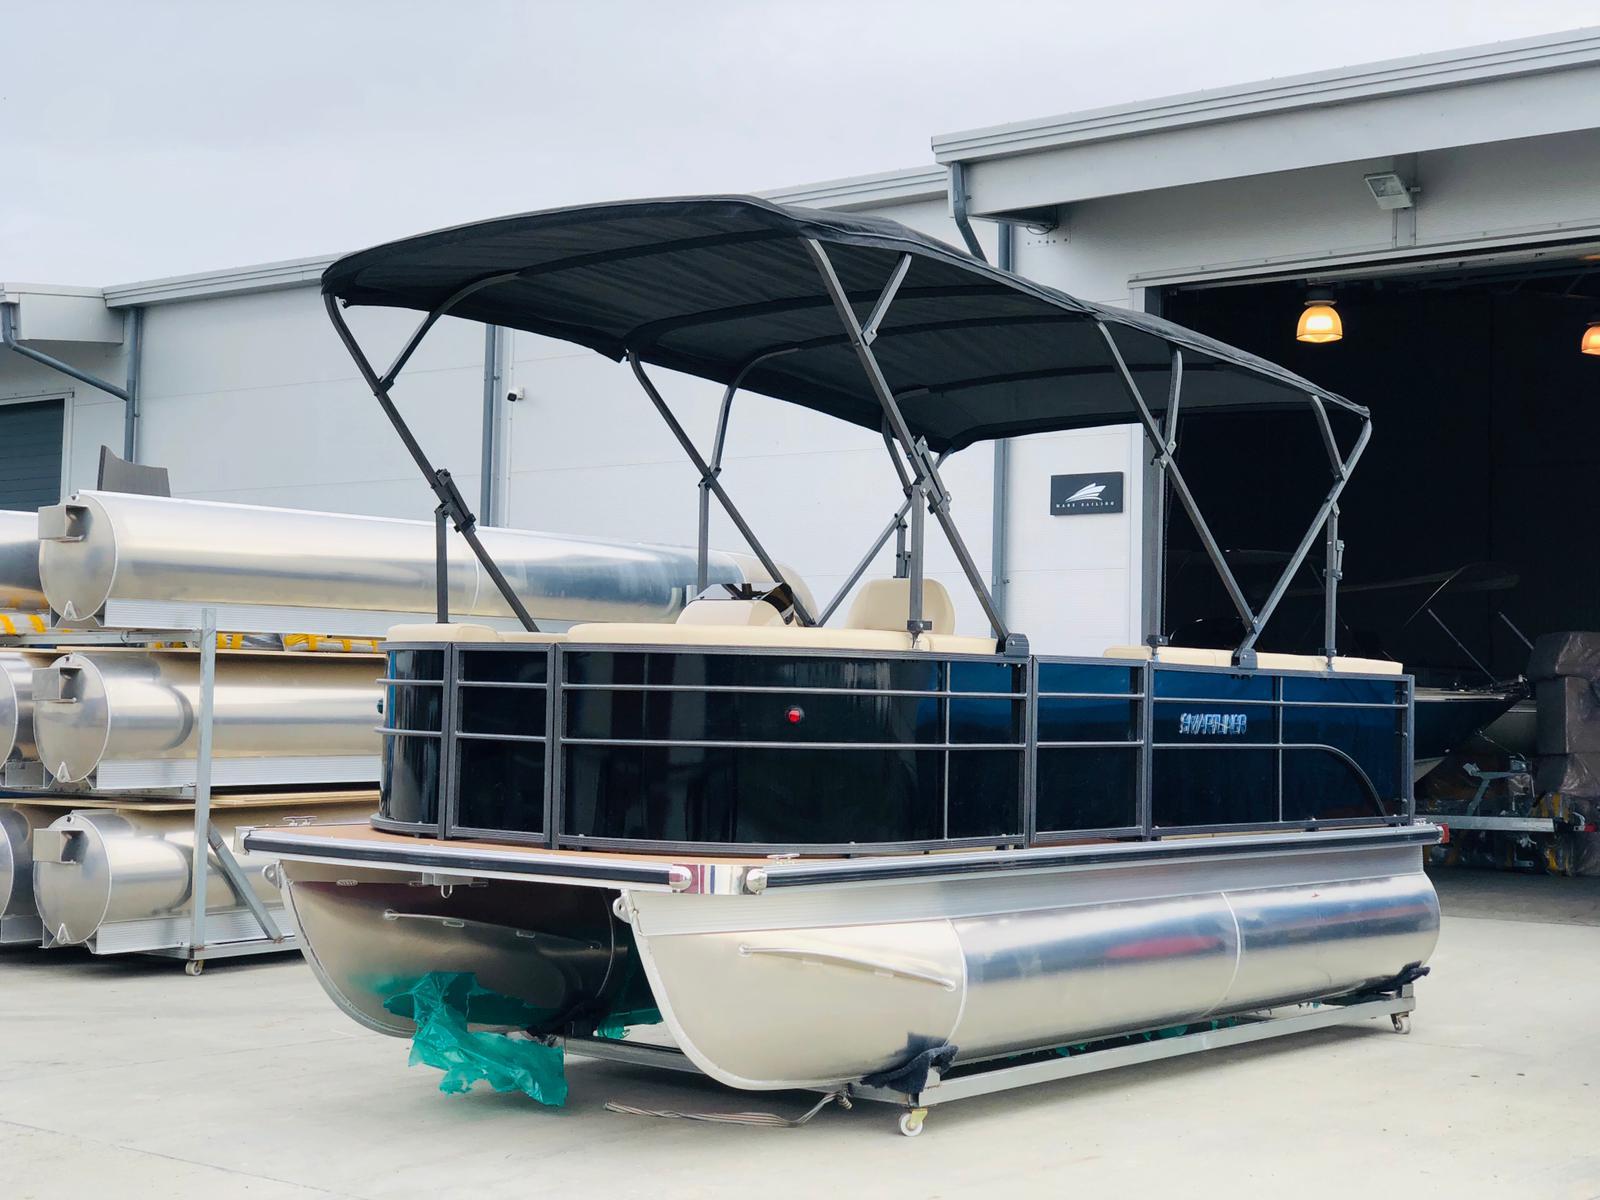 New Or Used Boats For Sale, 56% OFF